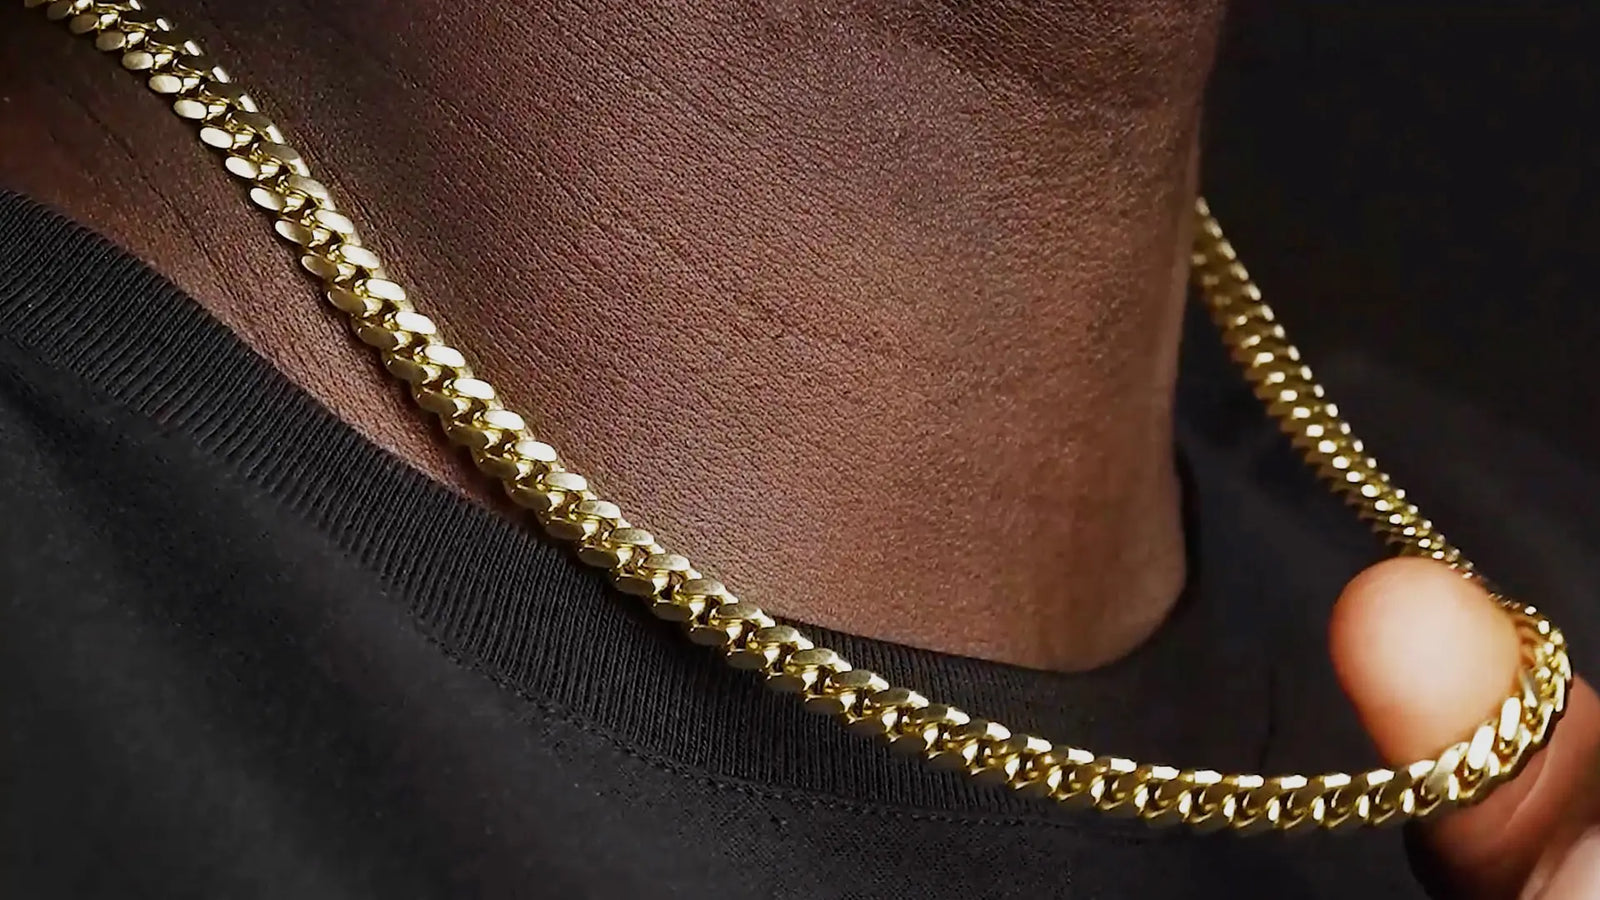 Mens Cuban Link Chain Miami Cuban Necklace 18K Gold Silver Chain Diamond Cut Chains for Men Women 14mm Iced Out Hip Hop Jewelry